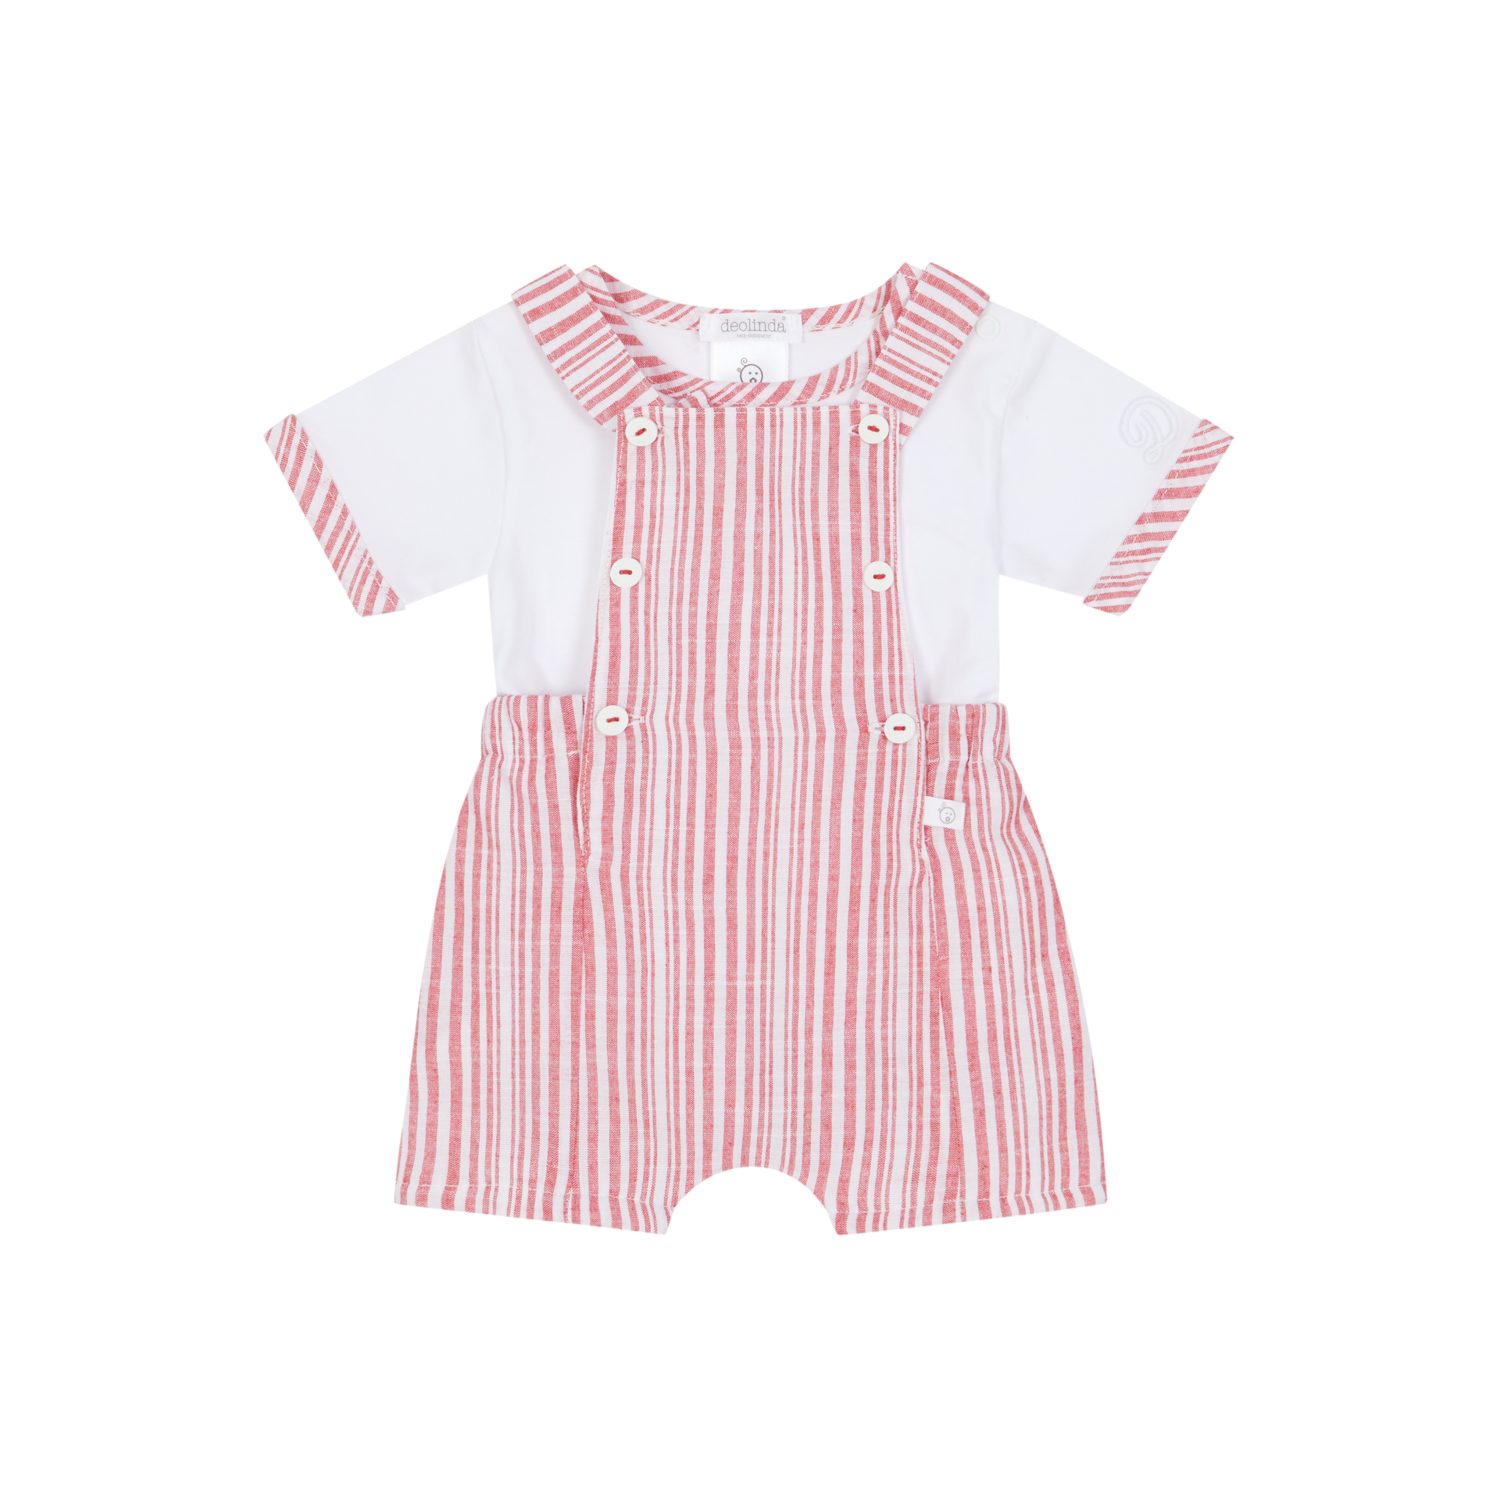 DEOLINDA 'MEXICO' RED AND WHITE STRIPE SHORT DUNGAREE SET 4601